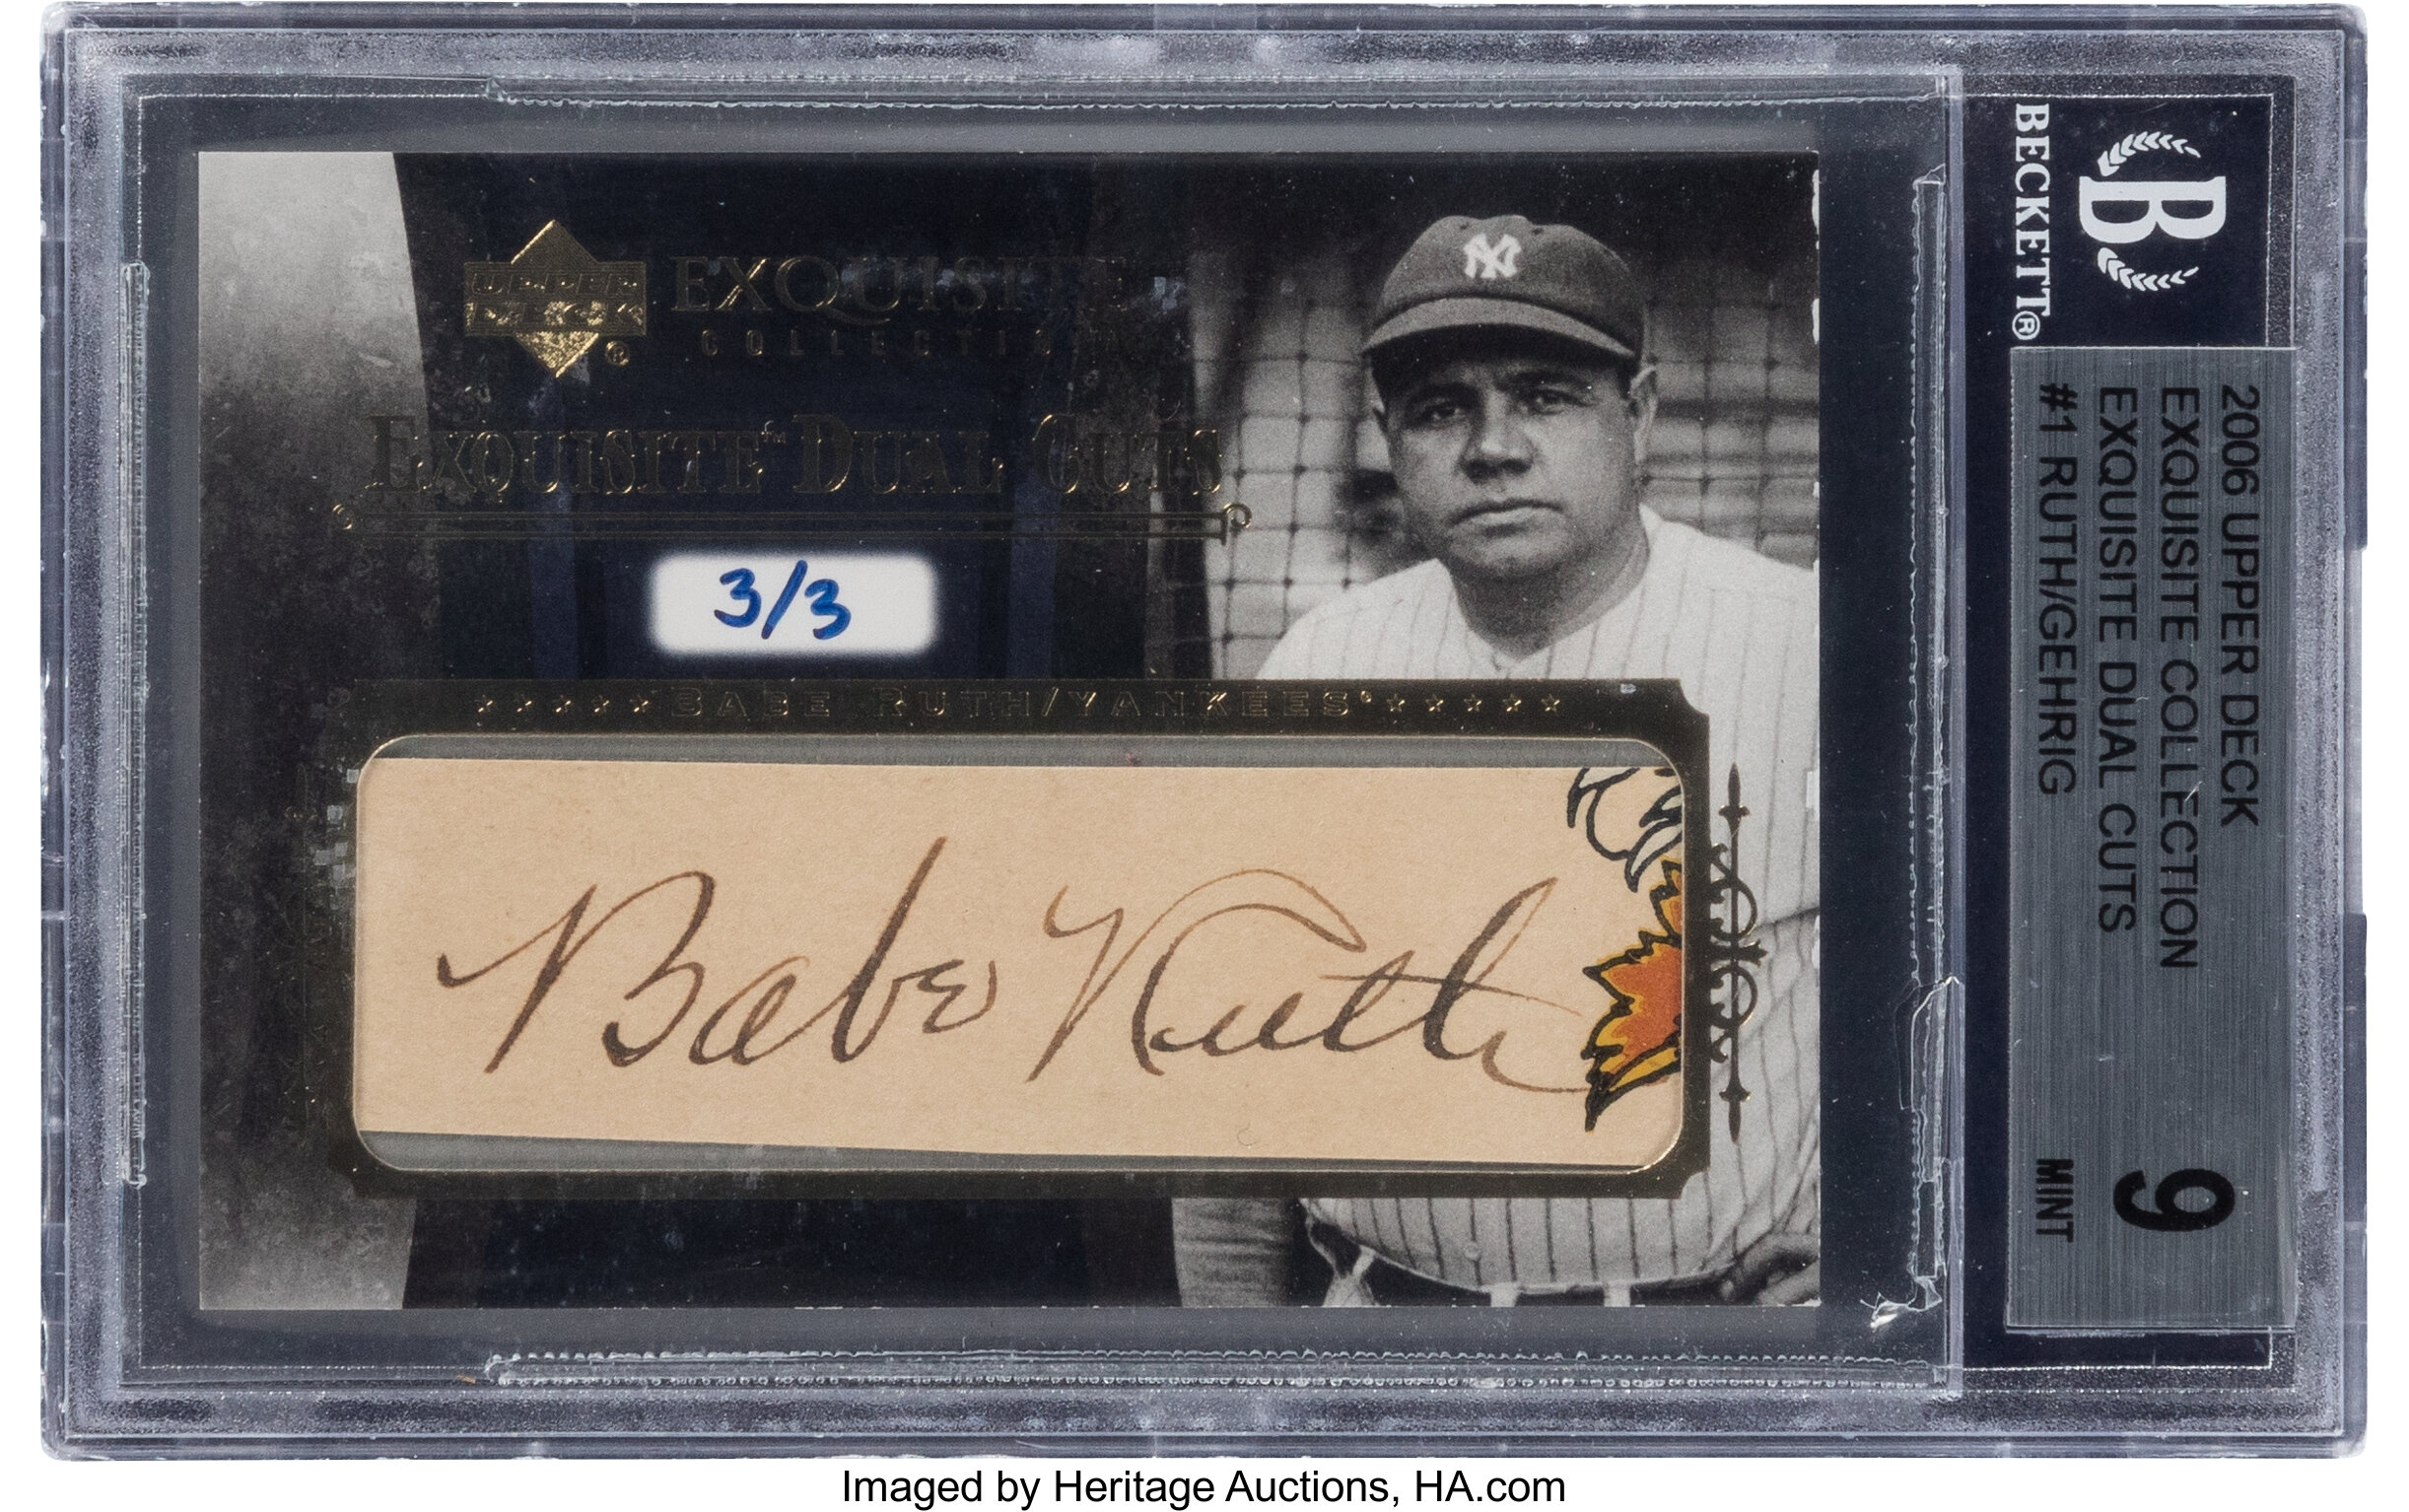 Babe Ruth Signed Autographed Vintage Photo New York Yankees BGS